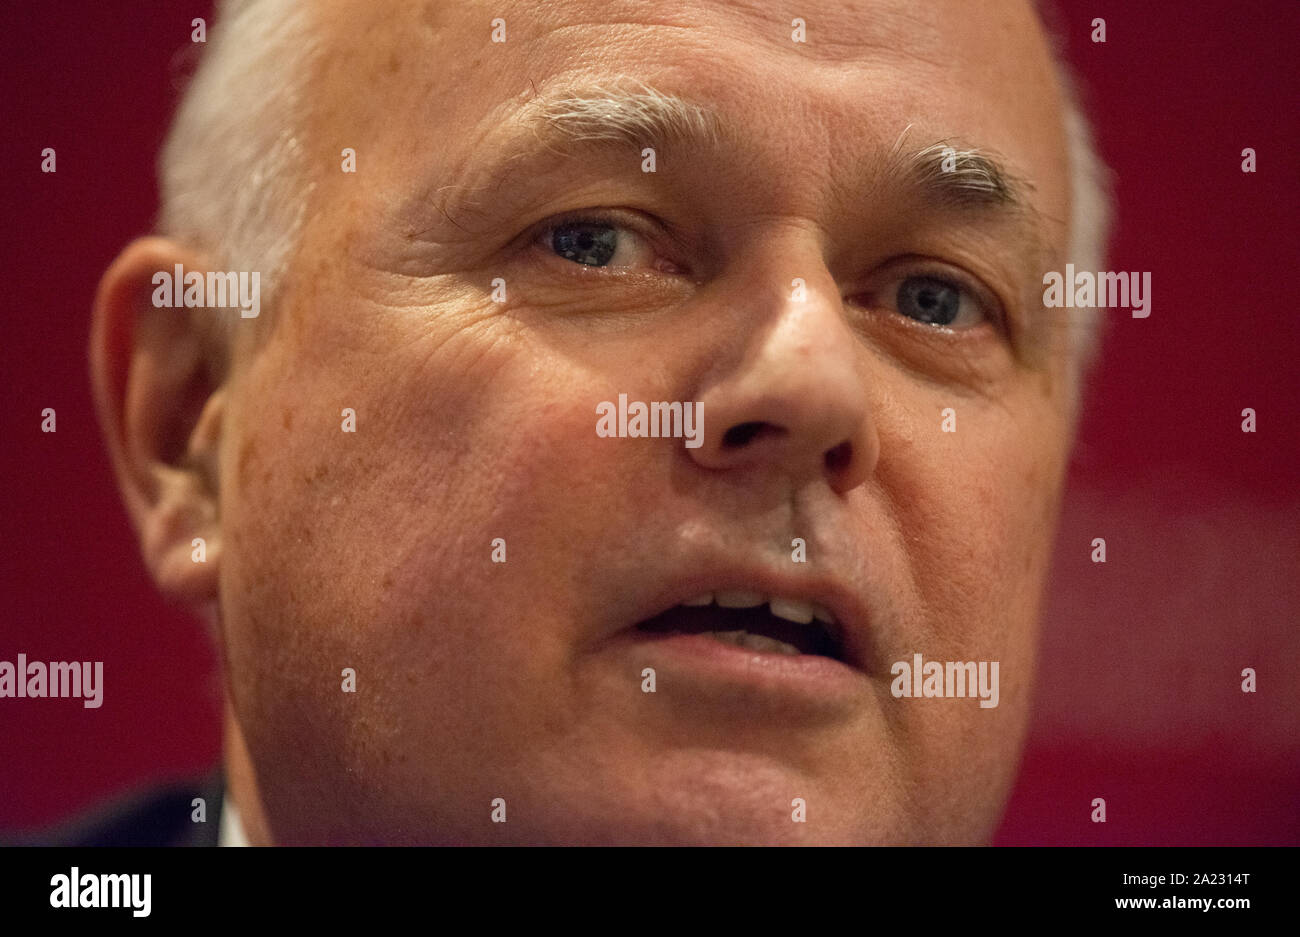 Manchester, UK. 30th Sep, 2019. Iain Duncan Smith, MP for Chingford and Woodford Green, speaks at the Centre for Social Justice fringe event The Forgotten Few: Why are 1.3 million people still unemployed?, on day two of the Conservative Party Conference in Manchester. Credit: Russell Hart/Alamy Live News Stock Photo